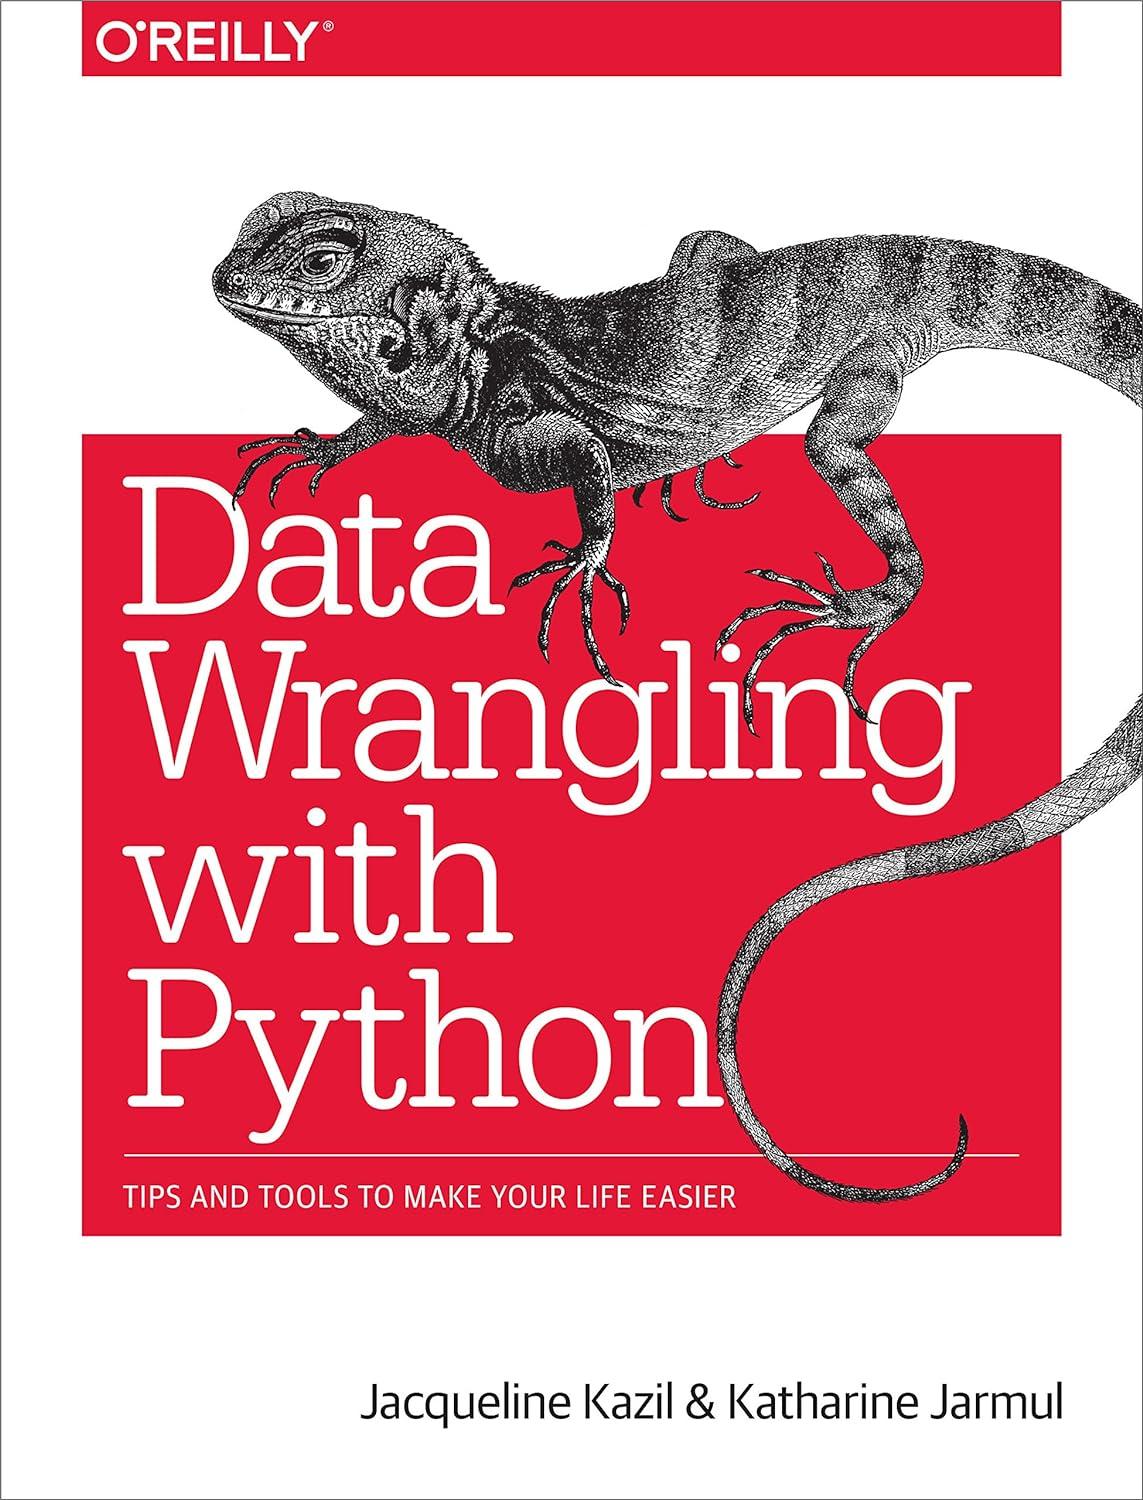 data wrangling with python tips and tools to make your life easier 1st edition jacqueline kazil, katharine